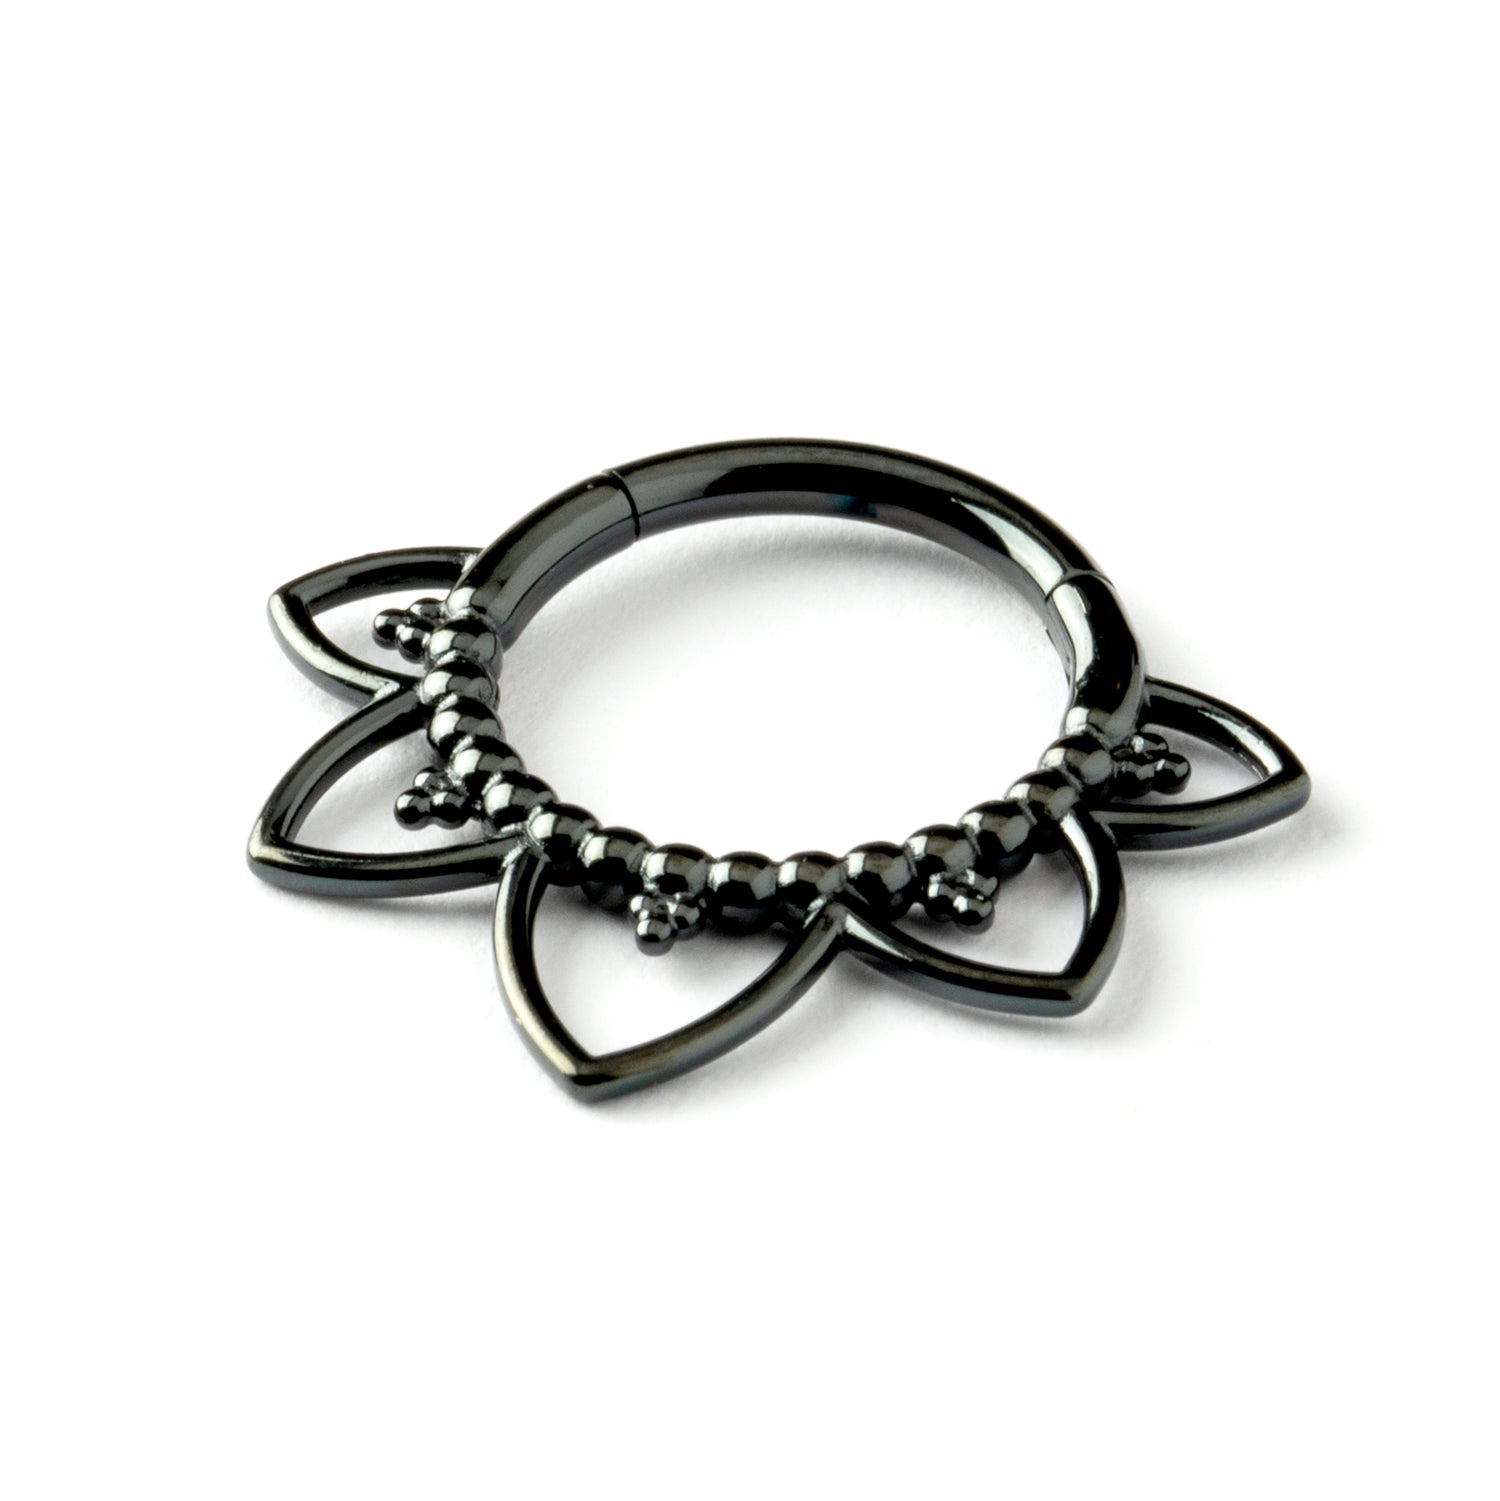 Iryia black surgical steel open lotus septum clickers left side view